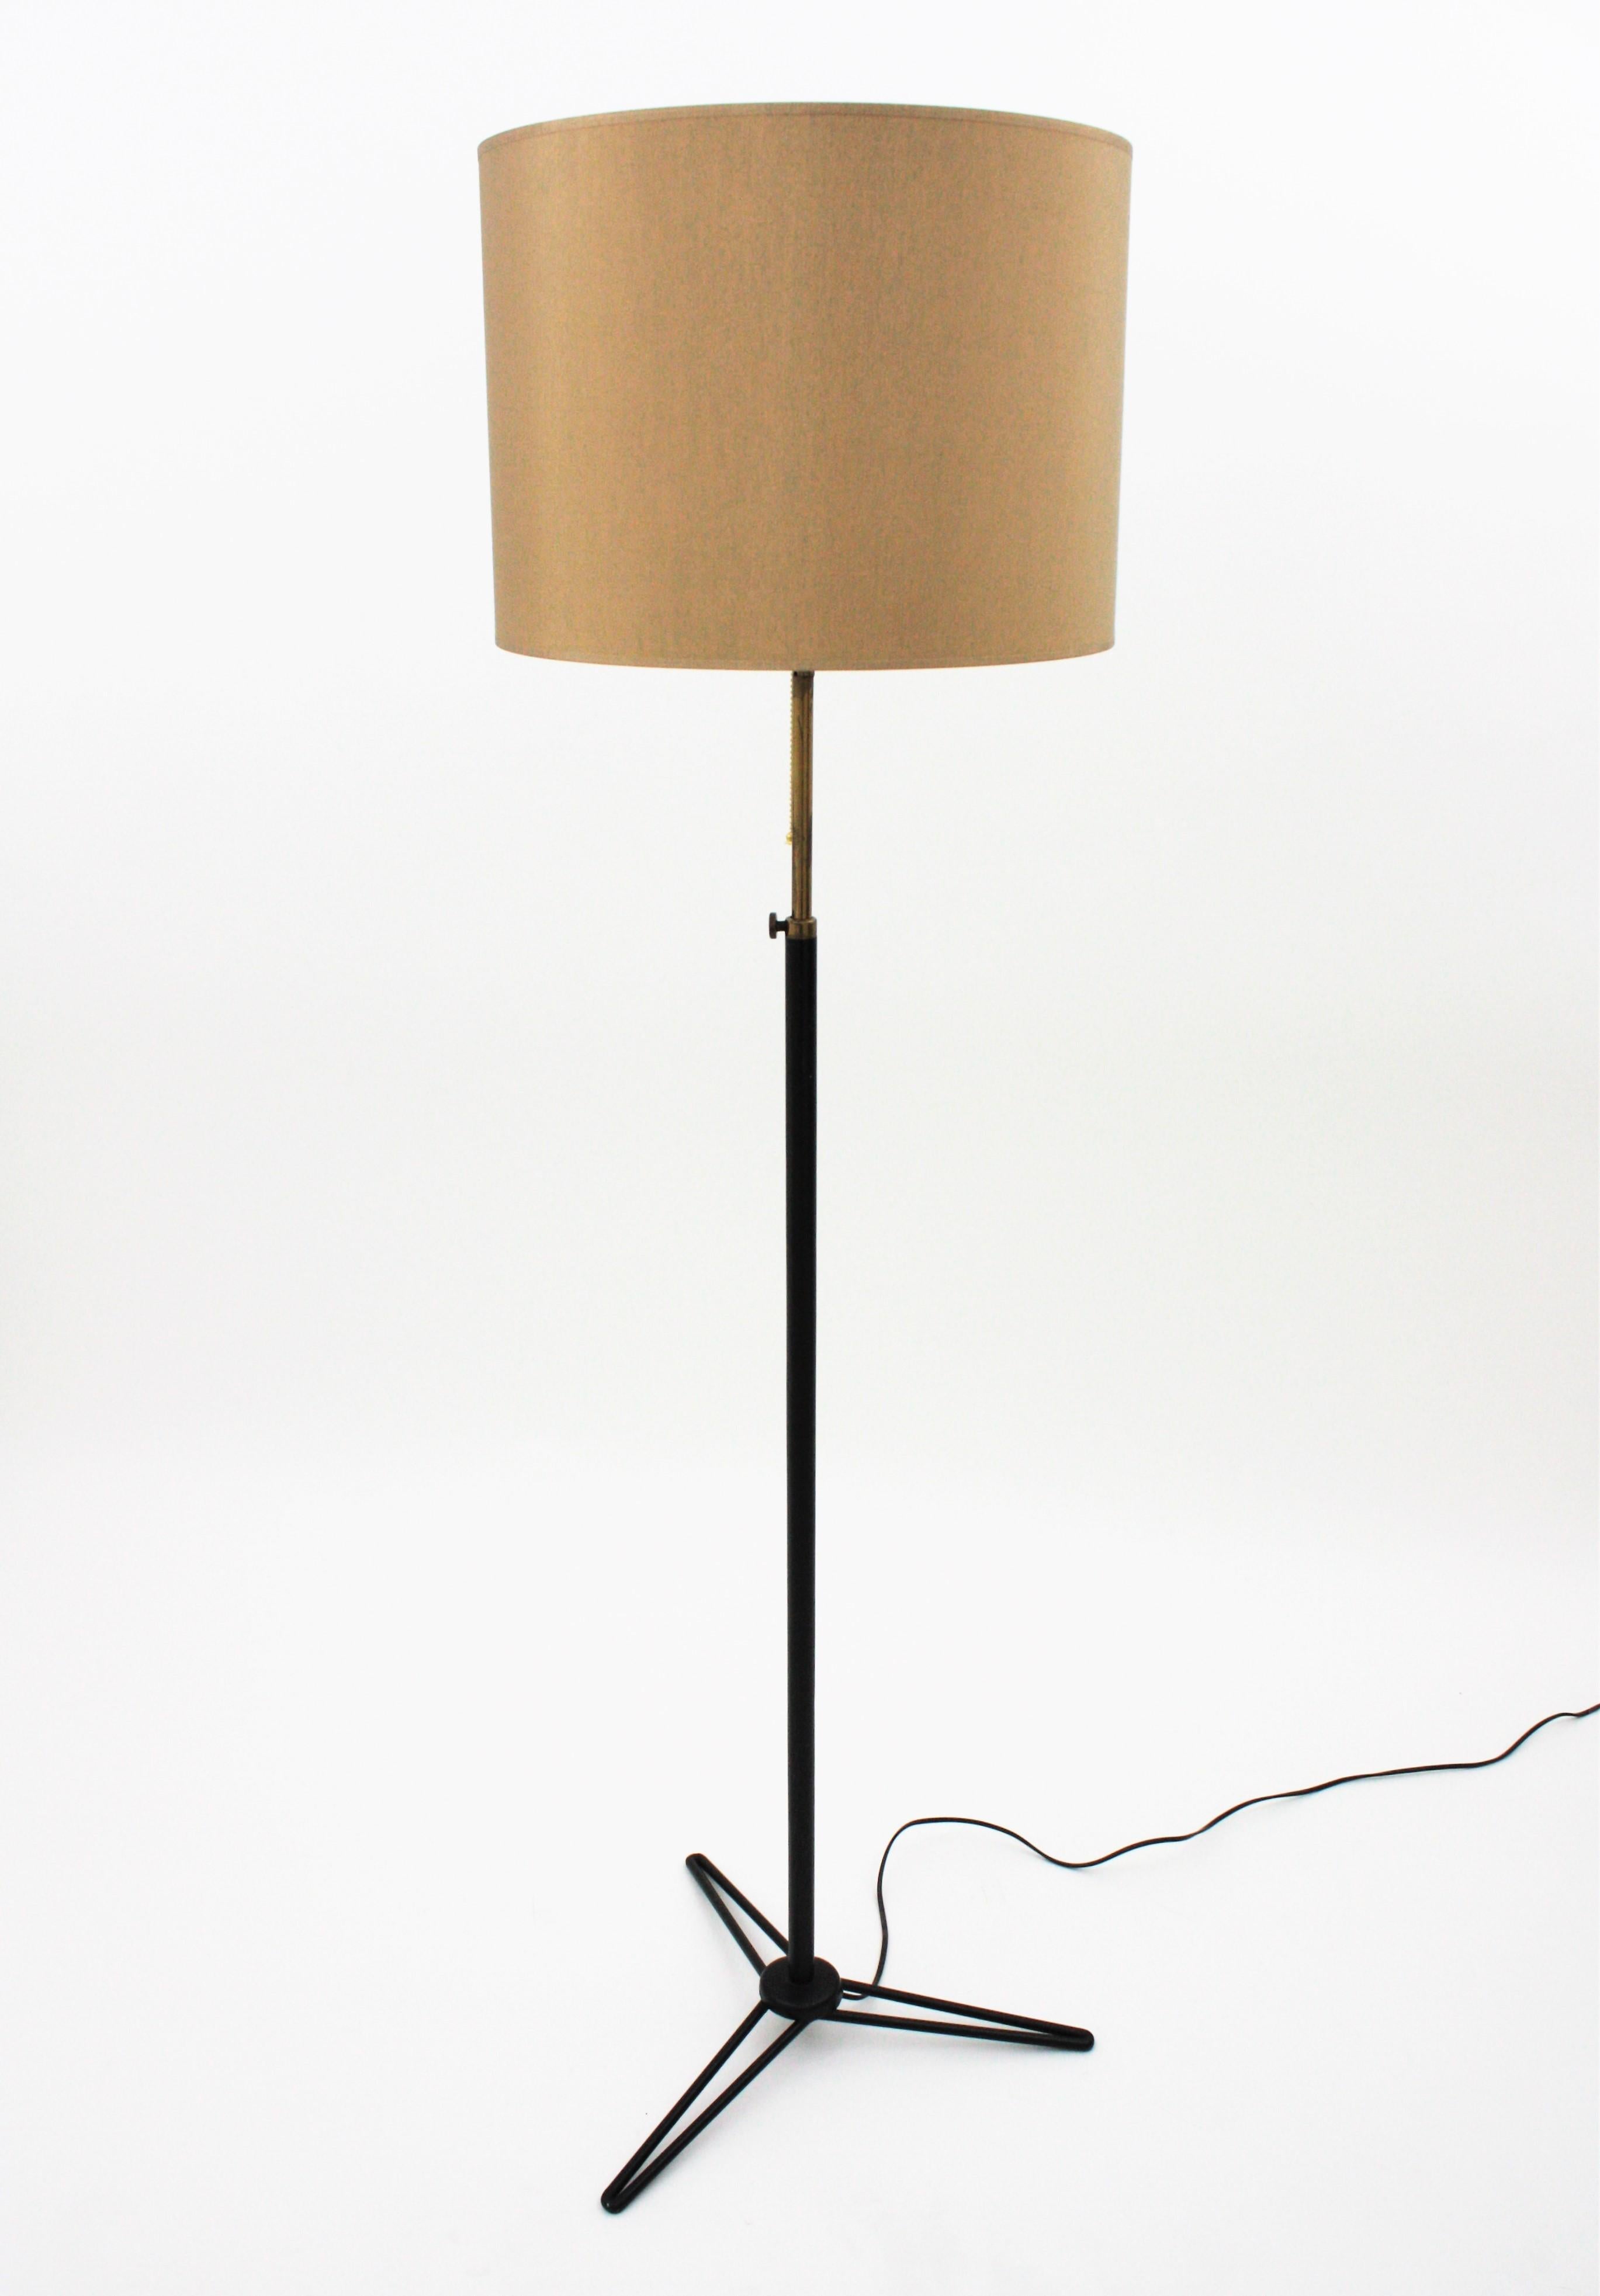 Stilnovo Tripod Floor Lamp in Black Lacquered Metal and Brass In Good Condition For Sale In Barcelona, ES